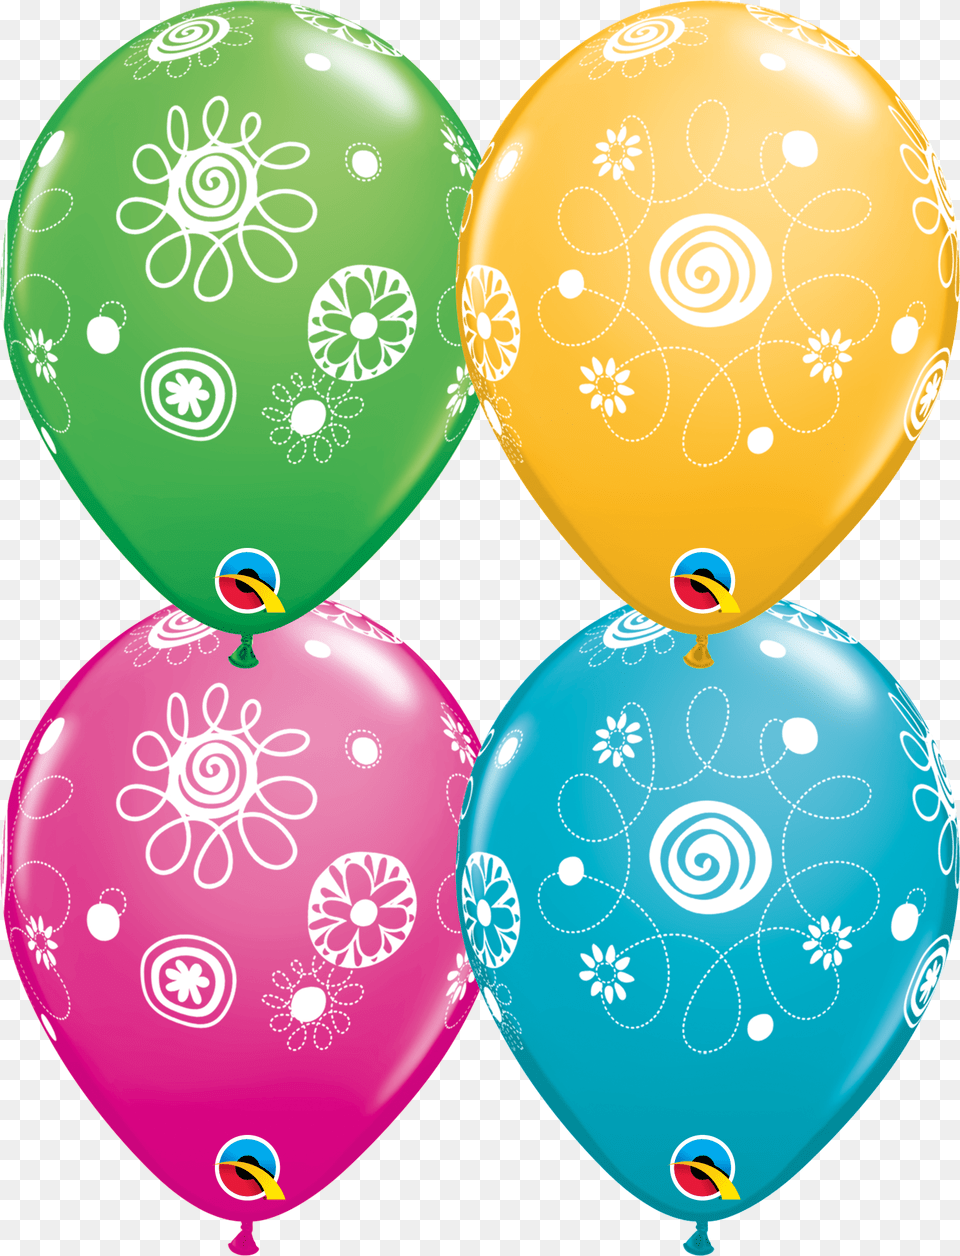 Flower And Balloon In Circle Logo Free Png Download